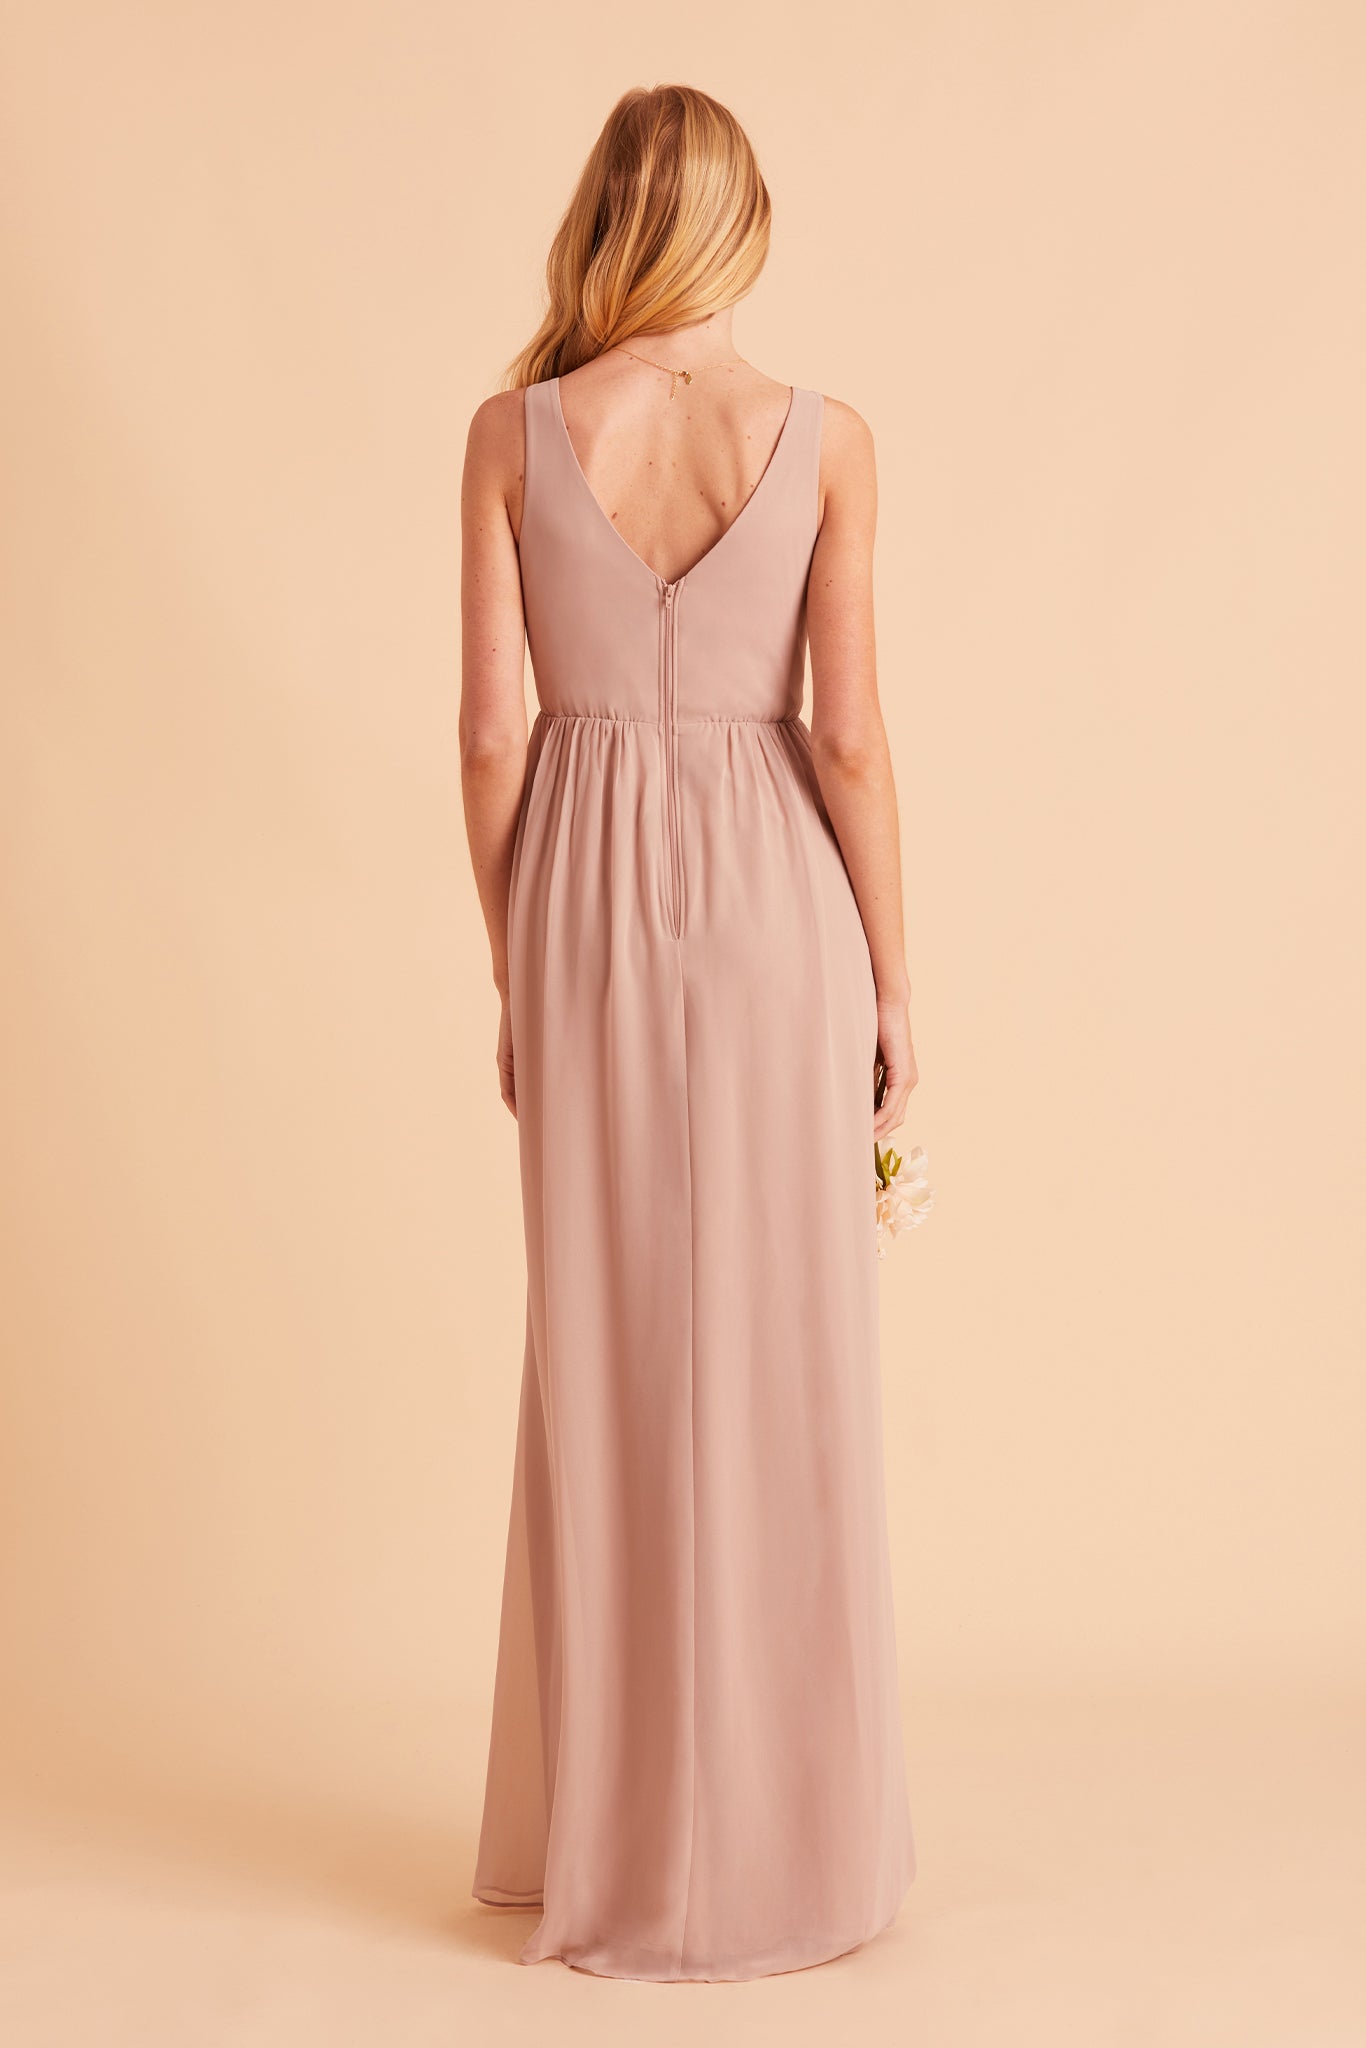 Laurie Empire Dress - Taupe